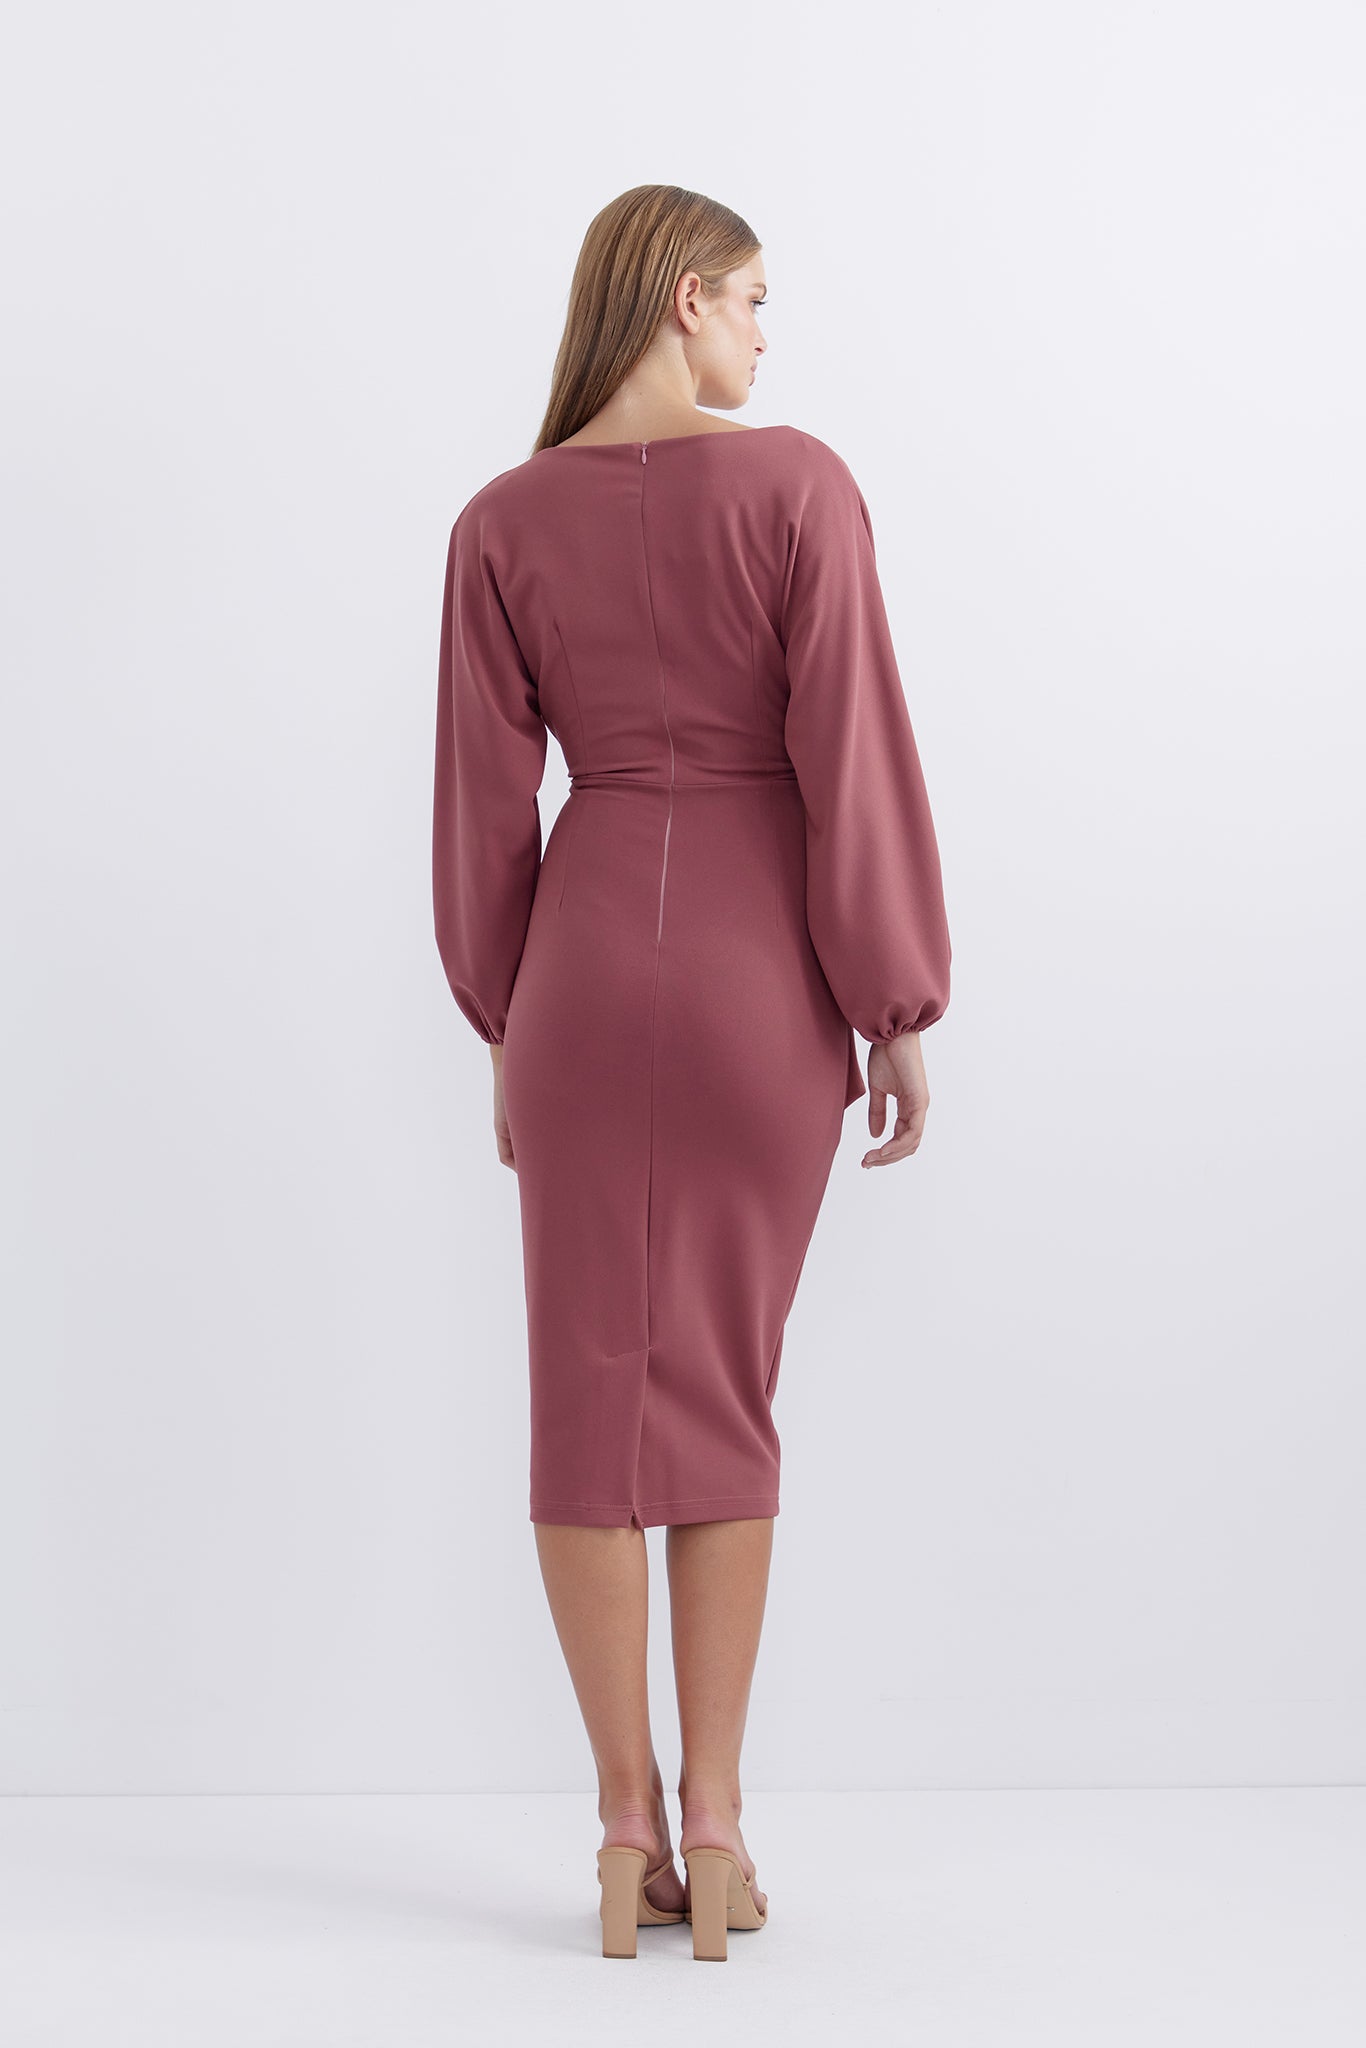 Charmer Midi - TAKE 40% OFF DISCOUNT APPLIED AT CHECKOUT